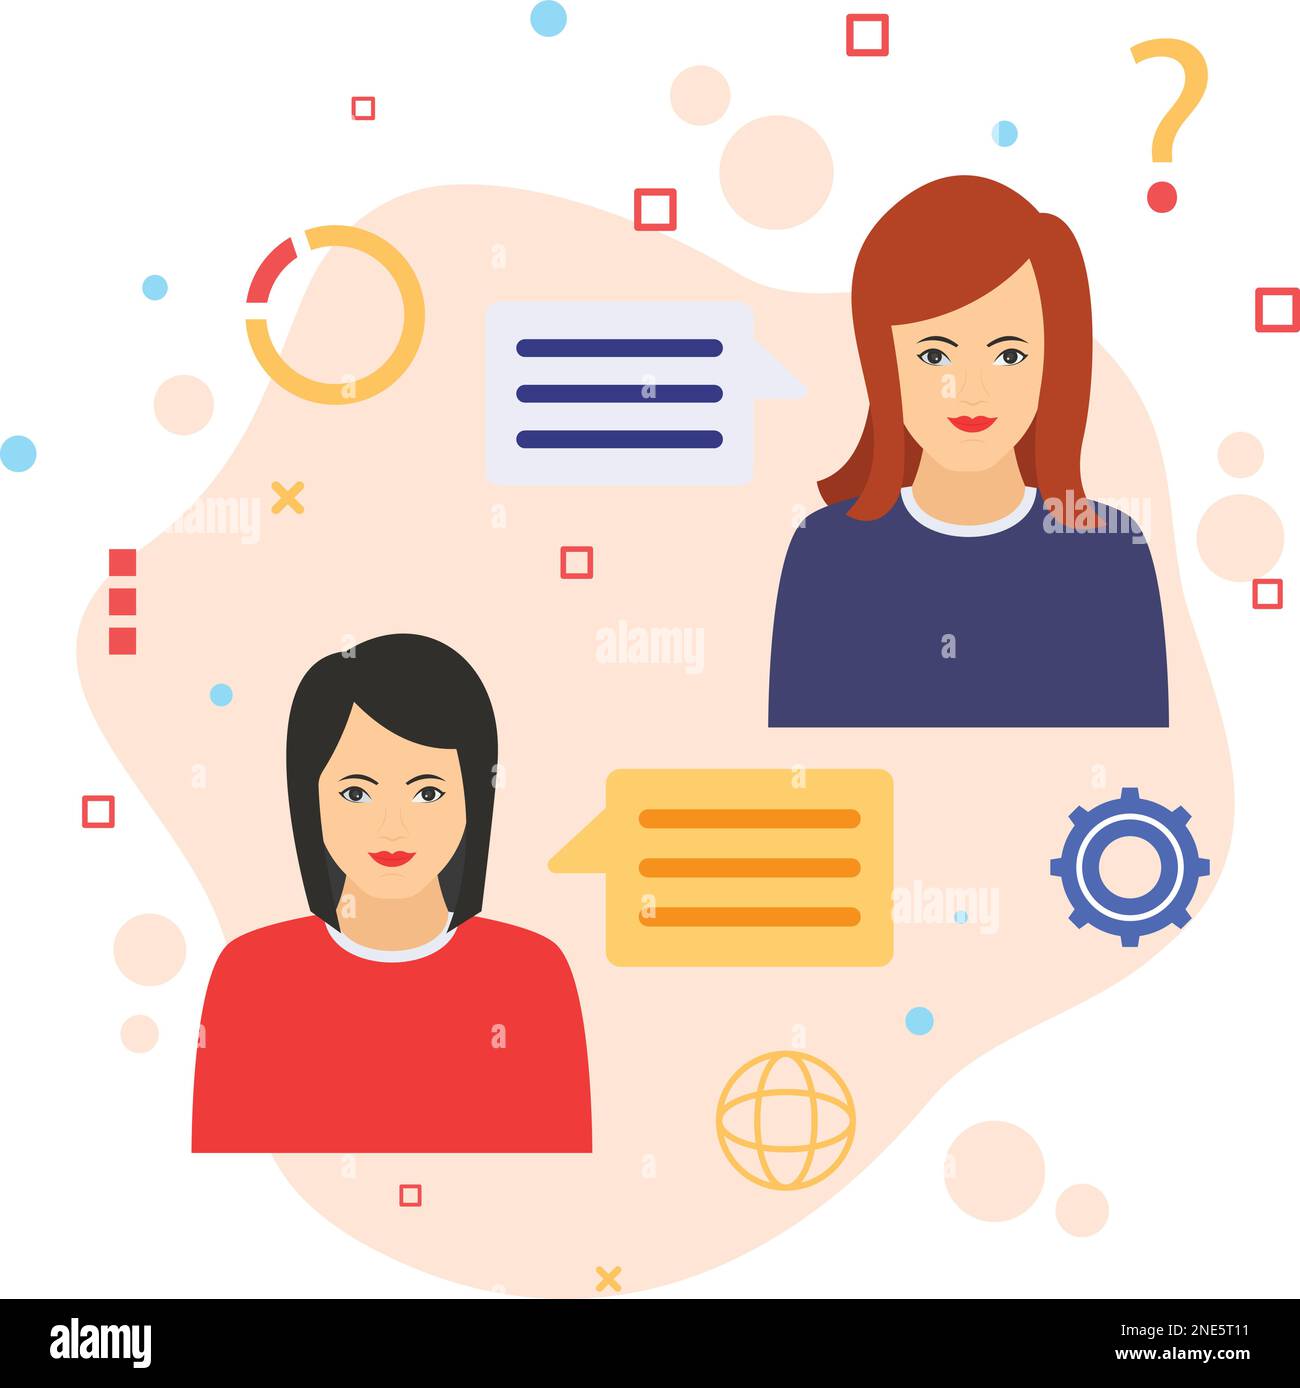 Discussion Session Sign, Corporate communication stock illustration, communication between team members concept, hrm symbol Chat bubble vector color i Stock Vector